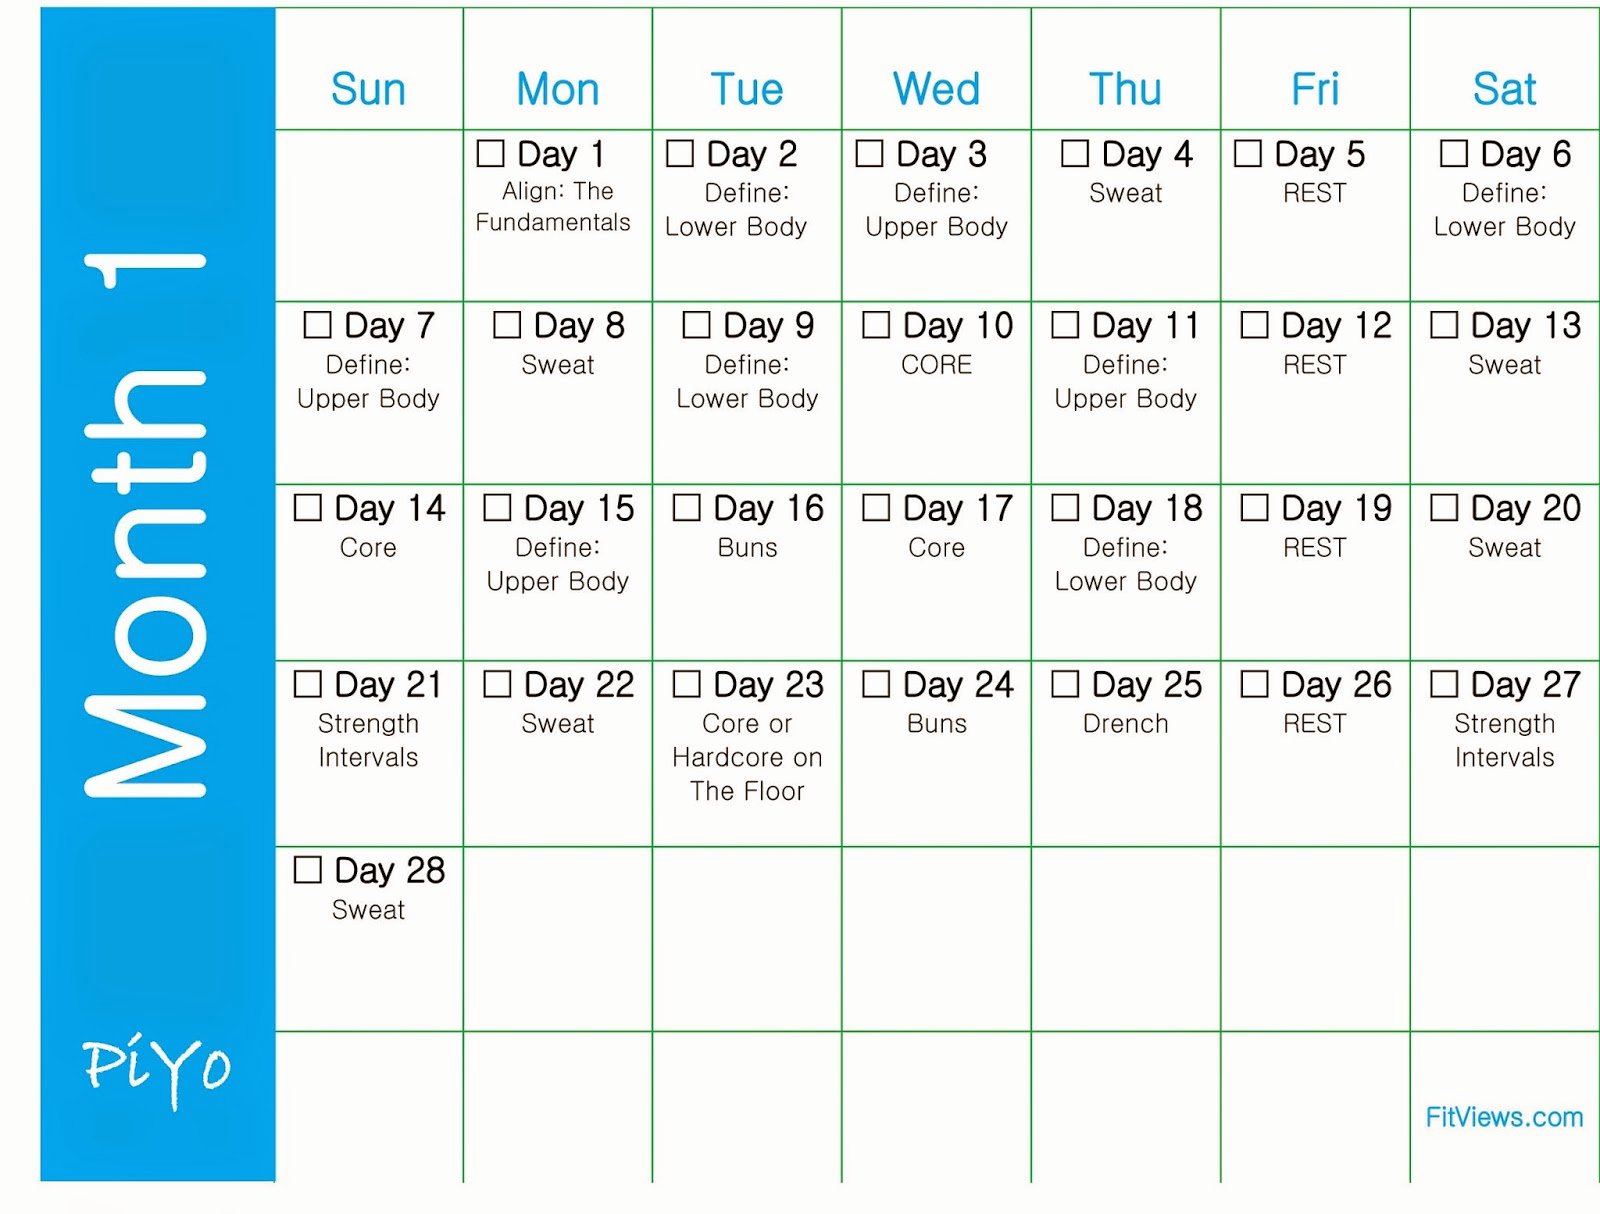 Monthly Workout Schedule Template Lovely Getting Started with Piyo Free Printable Piyo Workout